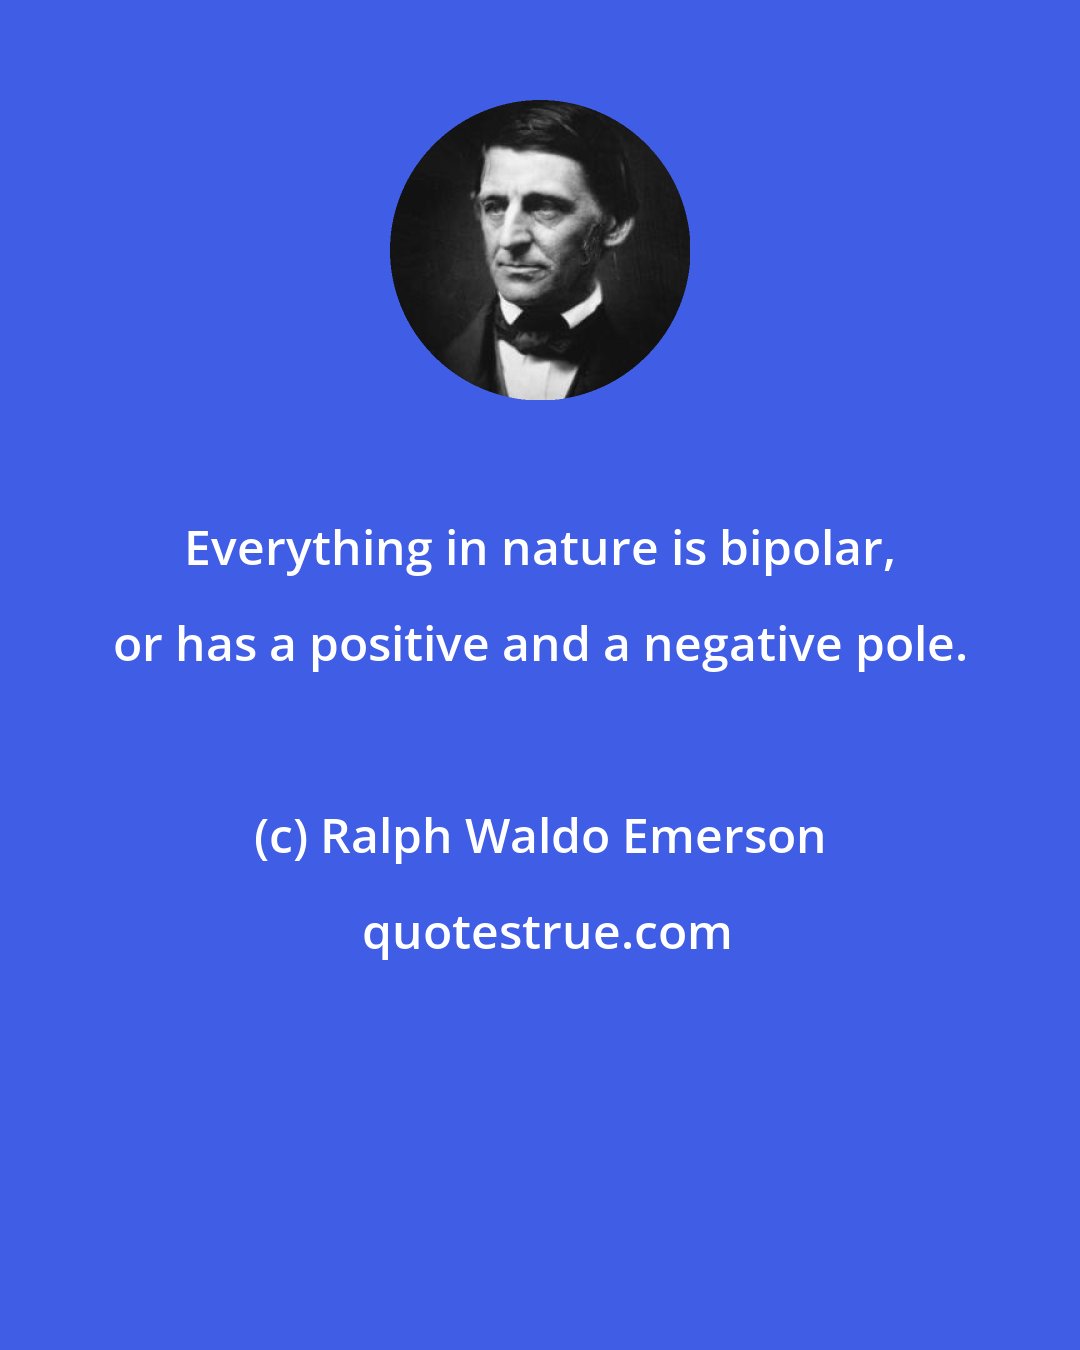 Ralph Waldo Emerson: Everything in nature is bipolar, or has a positive and a negative pole.